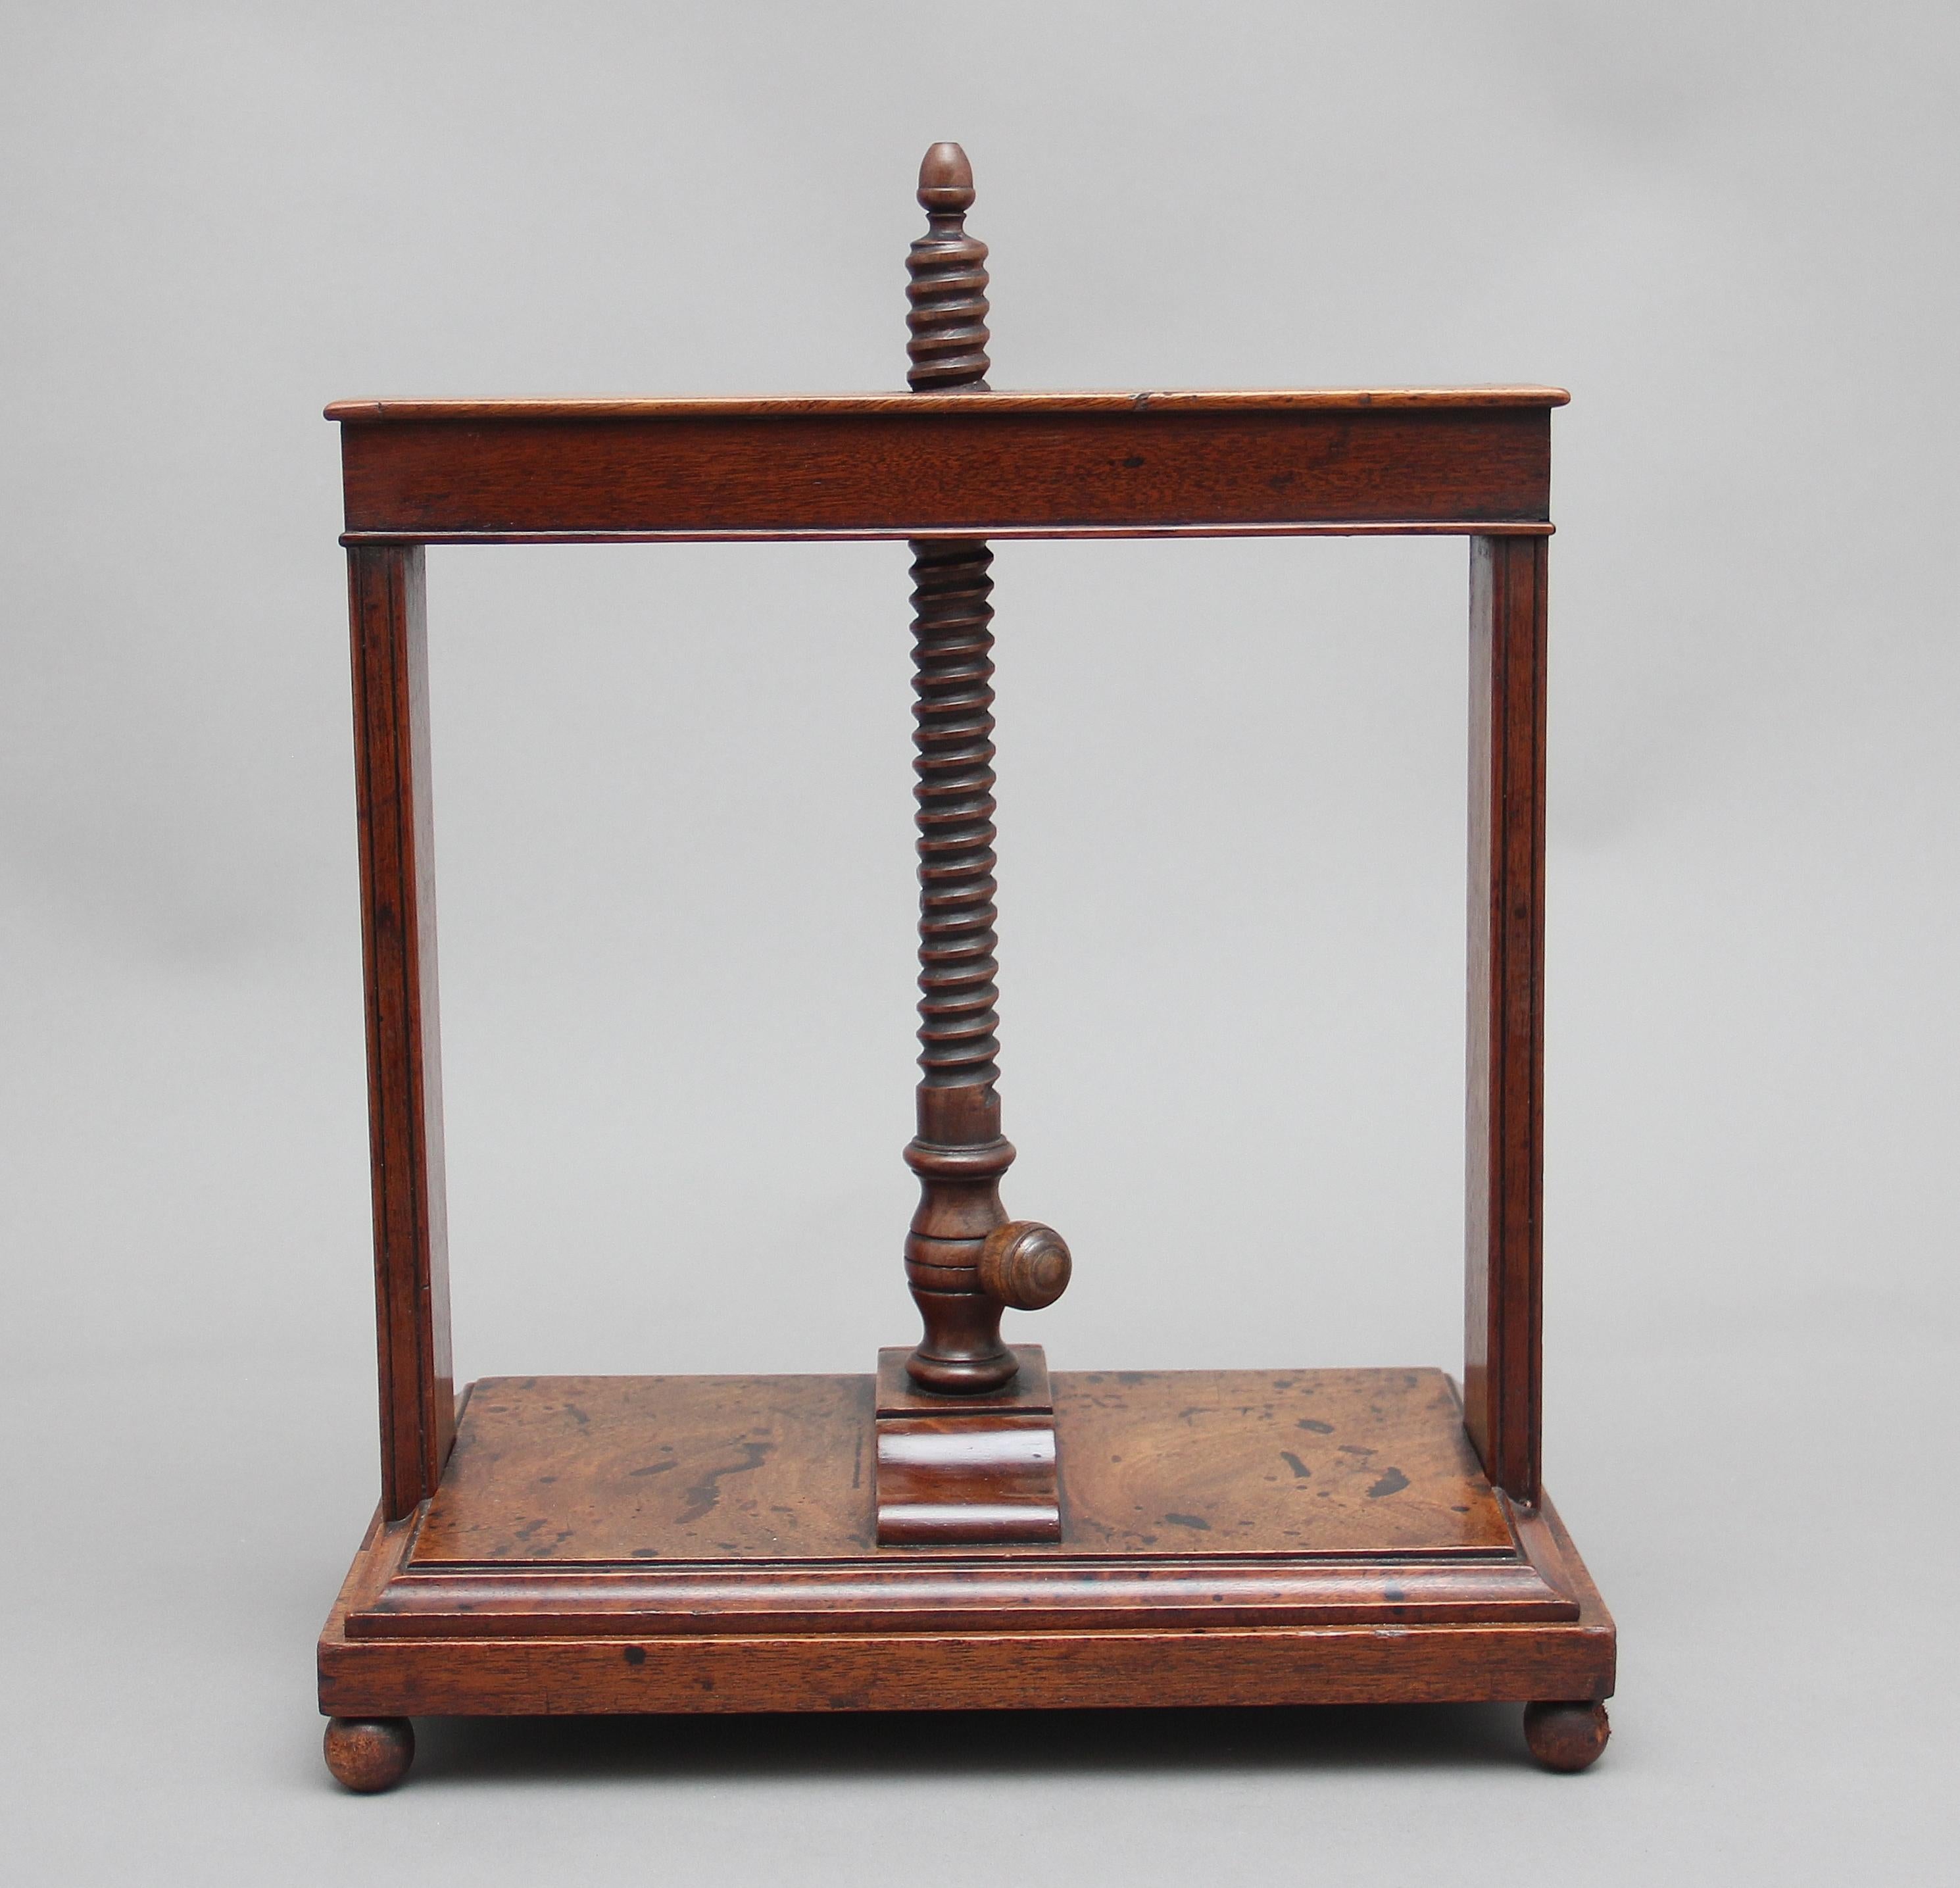 18th century mahogany book press, having a spiral thread mechanism, lovely quality moulded press, supported on turned feet, in good working order, circa 1790.

         